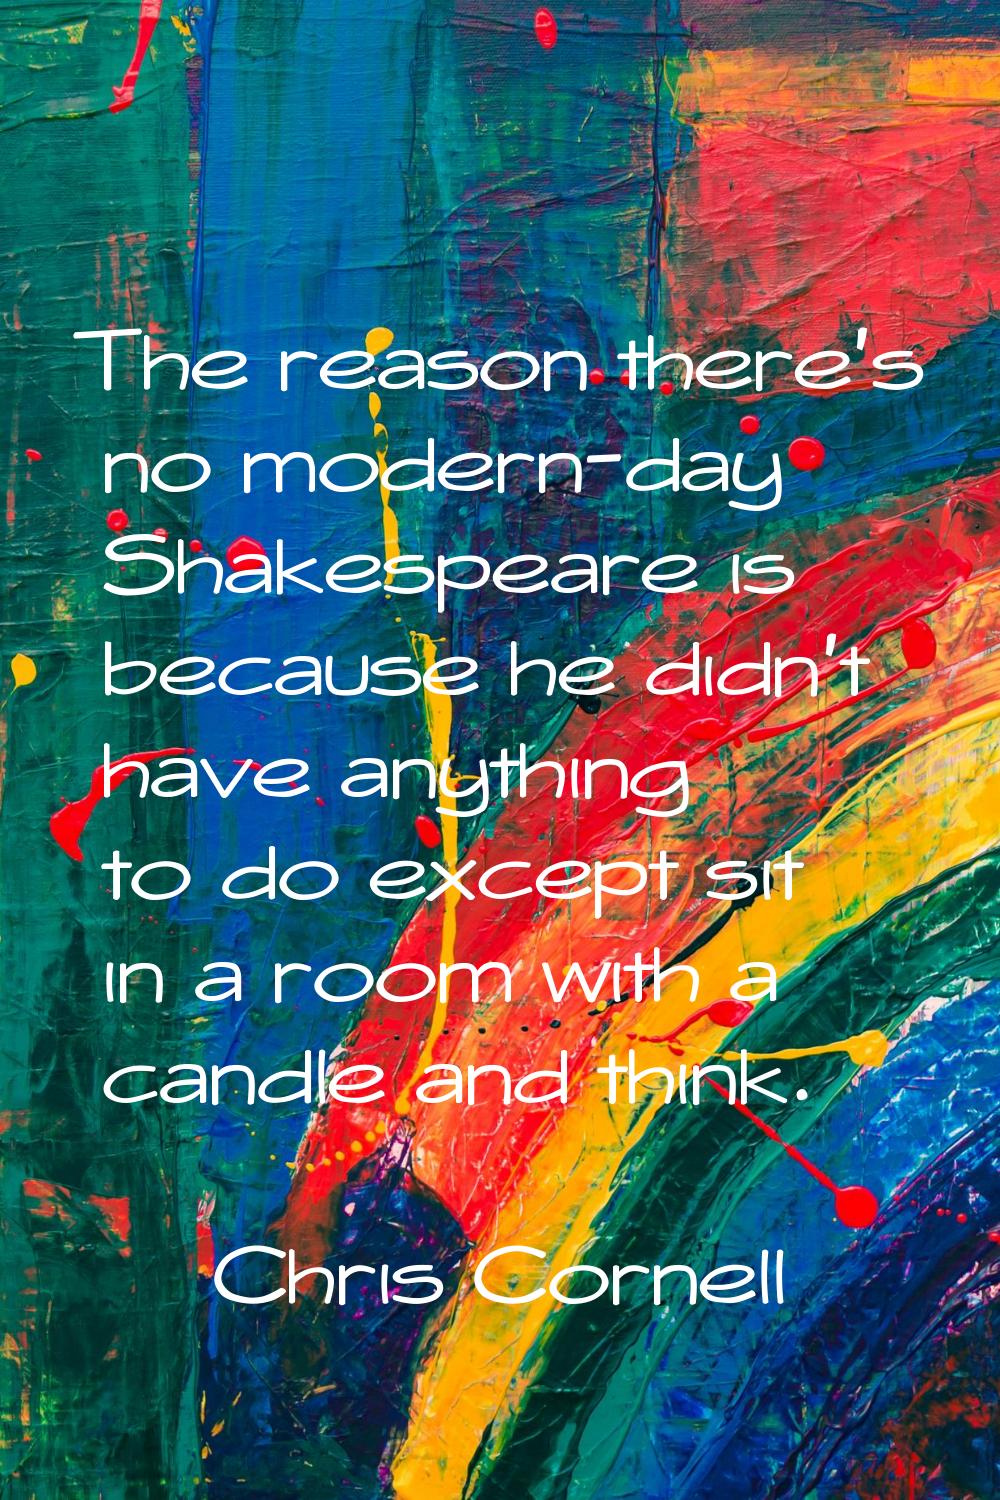 The reason there's no modern-day Shakespeare is because he didn't have anything to do except sit in